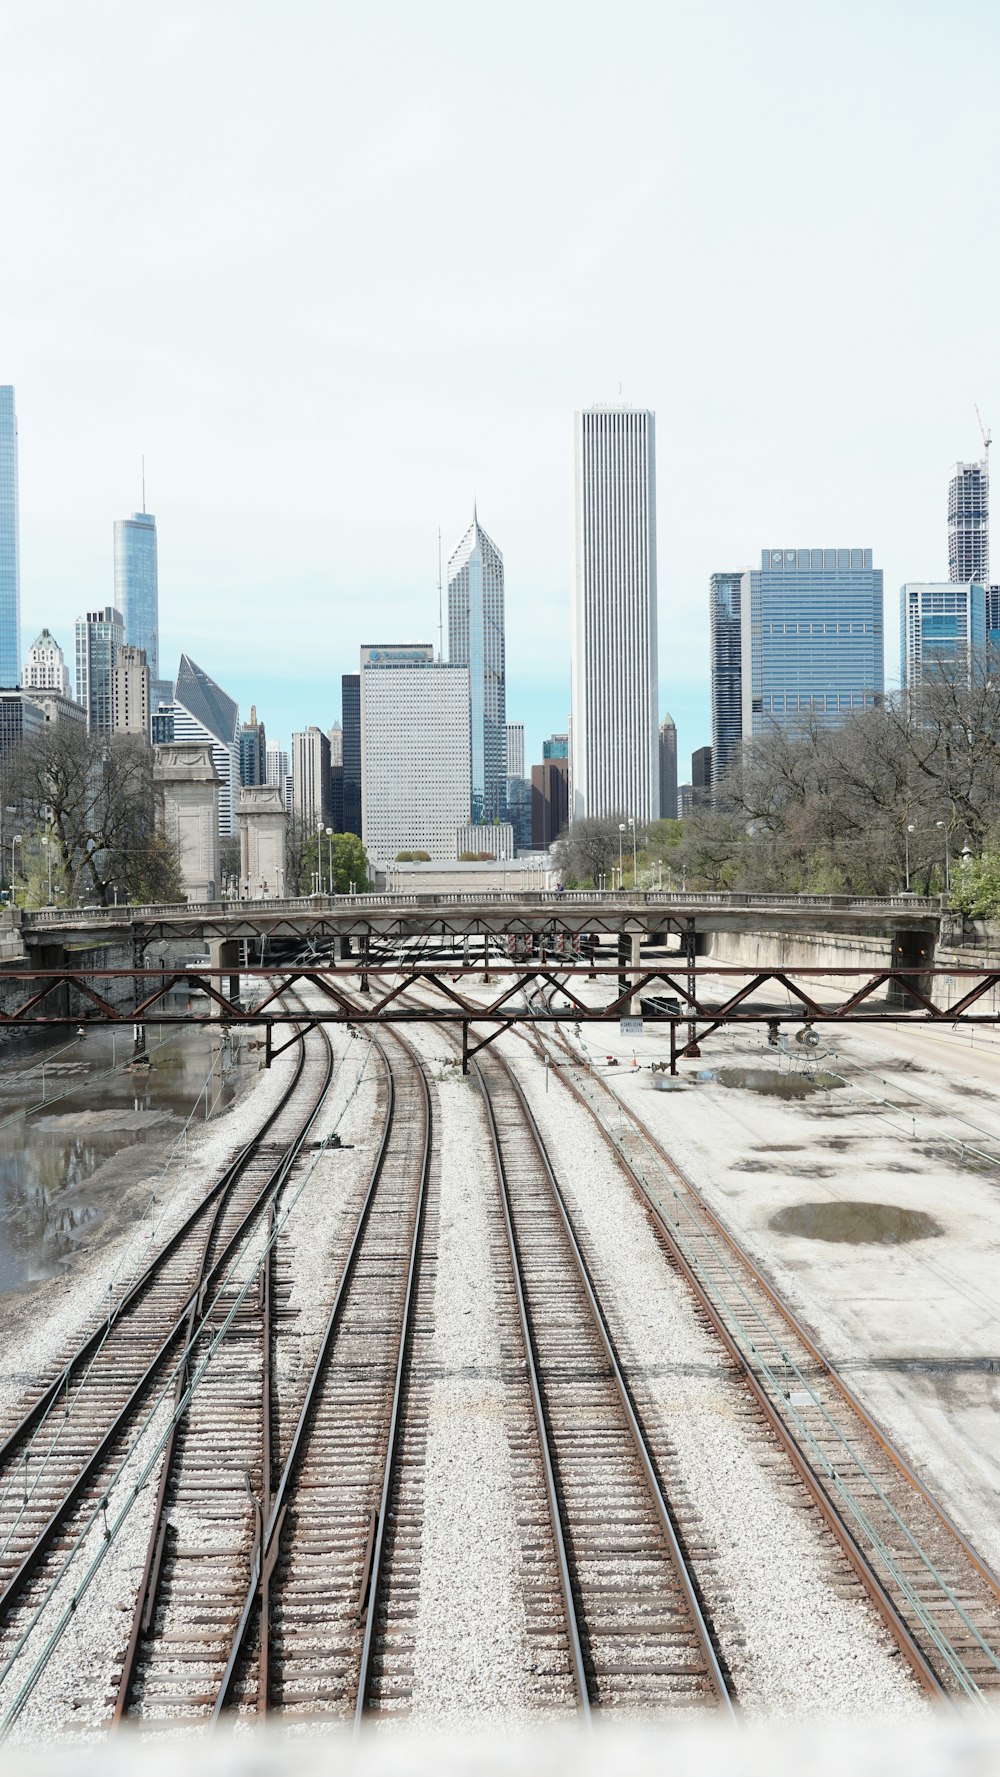 a view of a train track with a city in the background